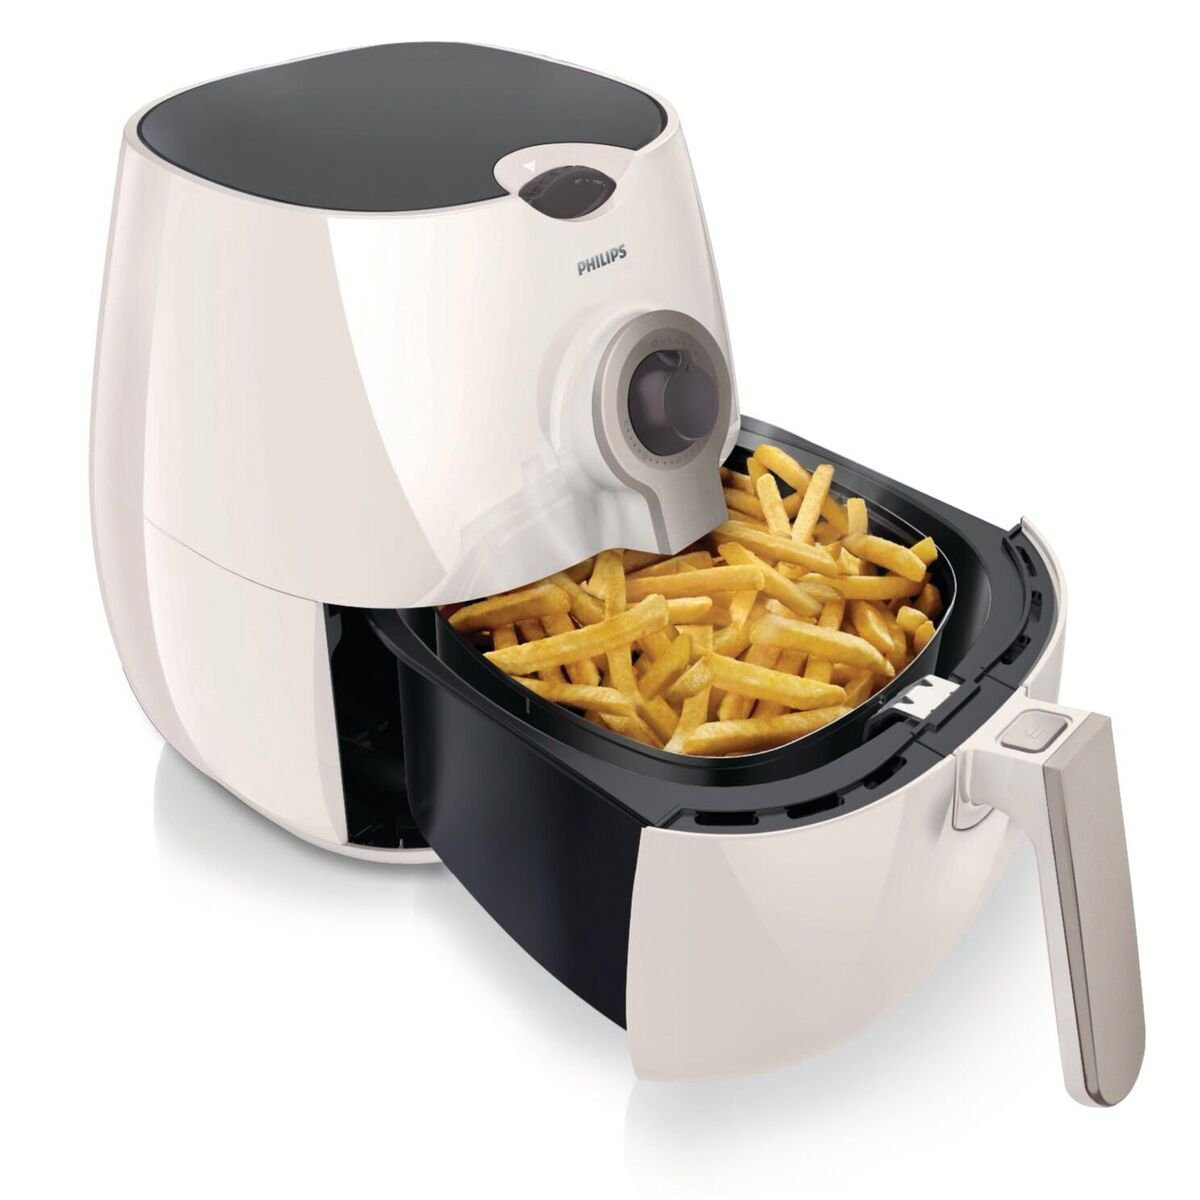 Philips Airfryer Fatless Fryer: Hot Chips or Hot Air? - Delishably